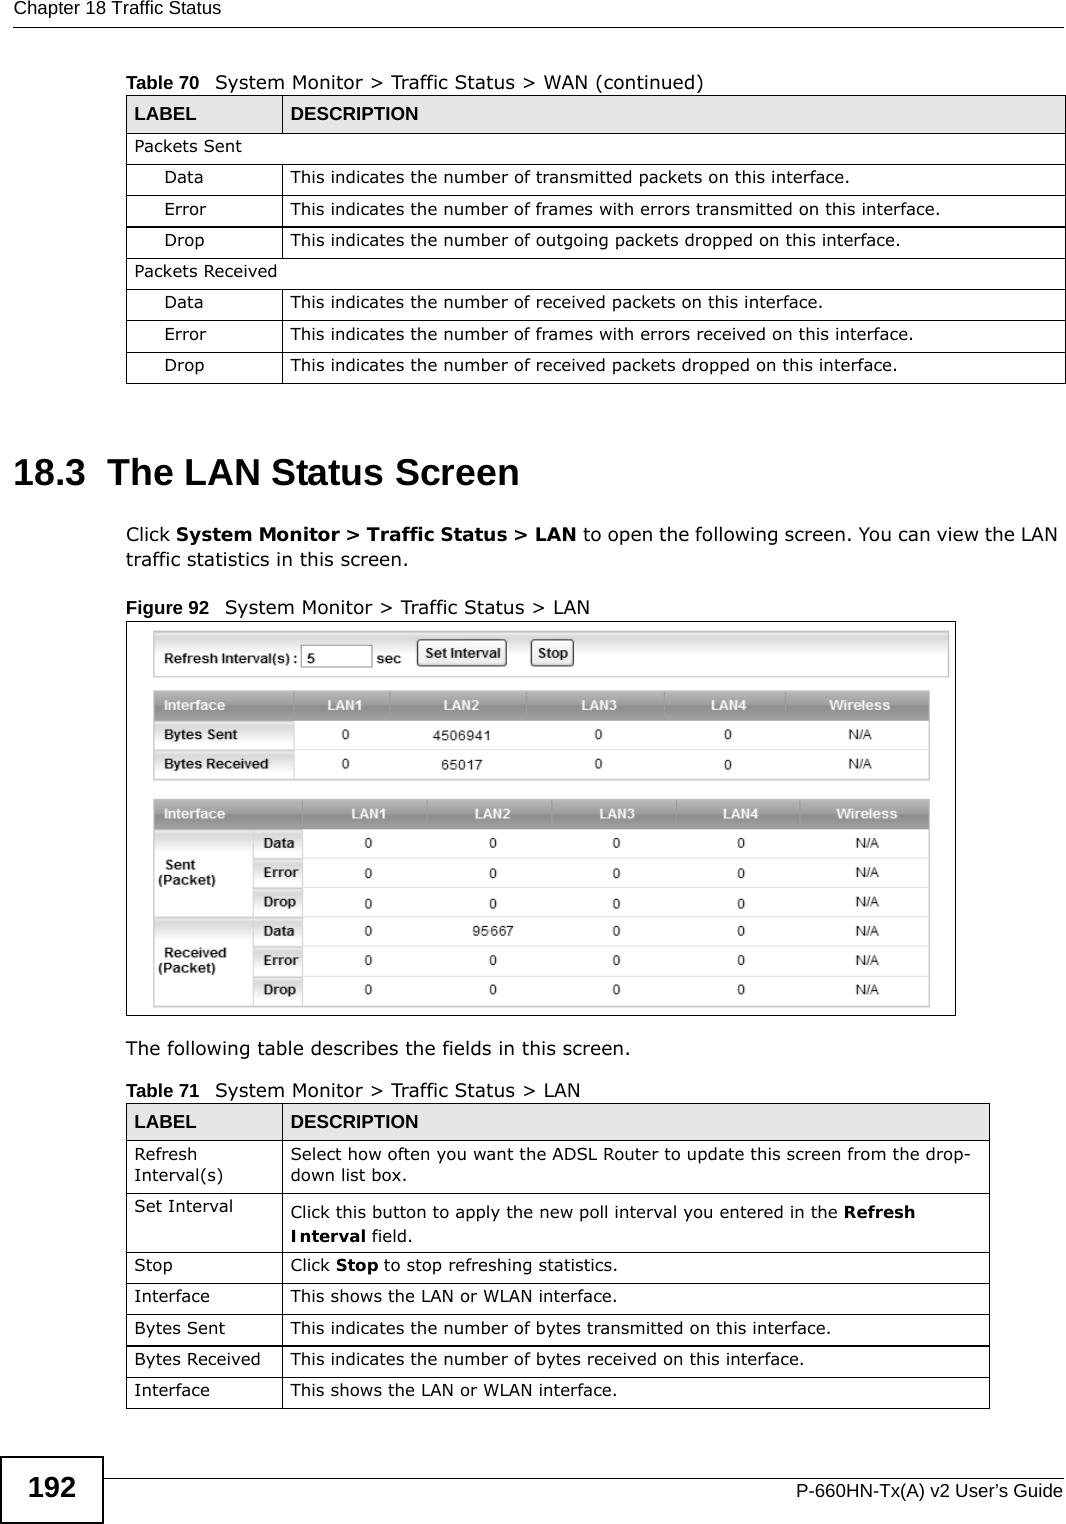 Chapter 18 Traffic StatusP-660HN-Tx(A) v2 User’s Guide19218.3  The LAN Status ScreenClick System Monitor &gt; Traffic Status &gt; LAN to open the following screen. You can view the LAN traffic statistics in this screen.Figure 92   System Monitor &gt; Traffic Status &gt; LANThe following table describes the fields in this screen.   Packets Sent Data  This indicates the number of transmitted packets on this interface.Error This indicates the number of frames with errors transmitted on this interface.Drop This indicates the number of outgoing packets dropped on this interface.Packets ReceivedData  This indicates the number of received packets on this interface.Error This indicates the number of frames with errors received on this interface.Drop This indicates the number of received packets dropped on this interface.Table 70   System Monitor &gt; Traffic Status &gt; WAN (continued)LABEL DESCRIPTIONTable 71   System Monitor &gt; Traffic Status &gt; LANLABEL DESCRIPTIONRefresh Interval(s)Select how often you want the ADSL Router to update this screen from the drop-down list box.Set Interval Click this button to apply the new poll interval you entered in the Refresh Interval field.Stop Click Stop to stop refreshing statistics.Interface This shows the LAN or WLAN interface. Bytes Sent This indicates the number of bytes transmitted on this interface.Bytes Received This indicates the number of bytes received on this interface.Interface This shows the LAN or WLAN interface. 